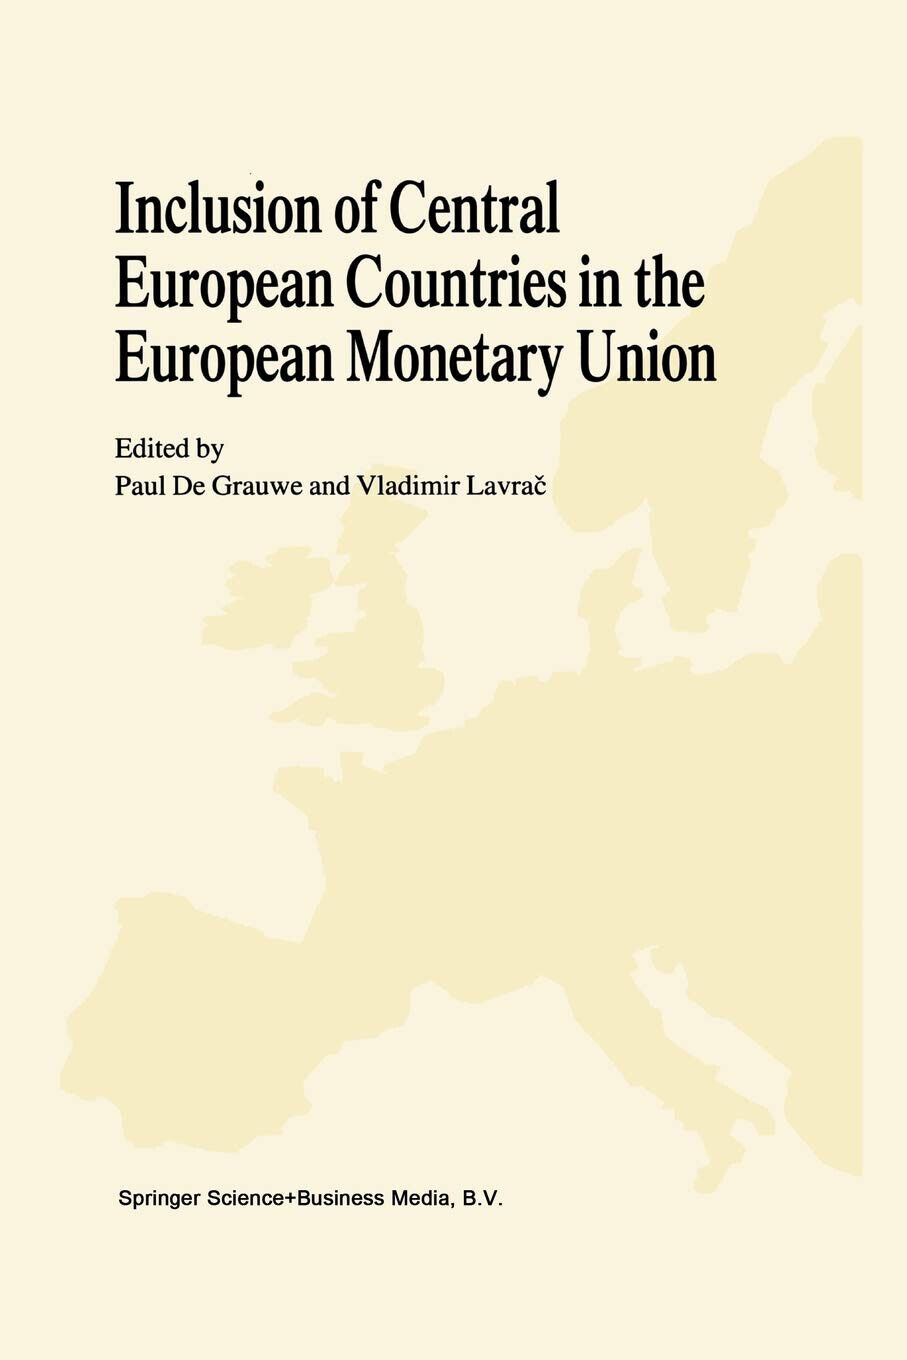 Inclusion of Central European Countries in the European Monetary Union - 2012